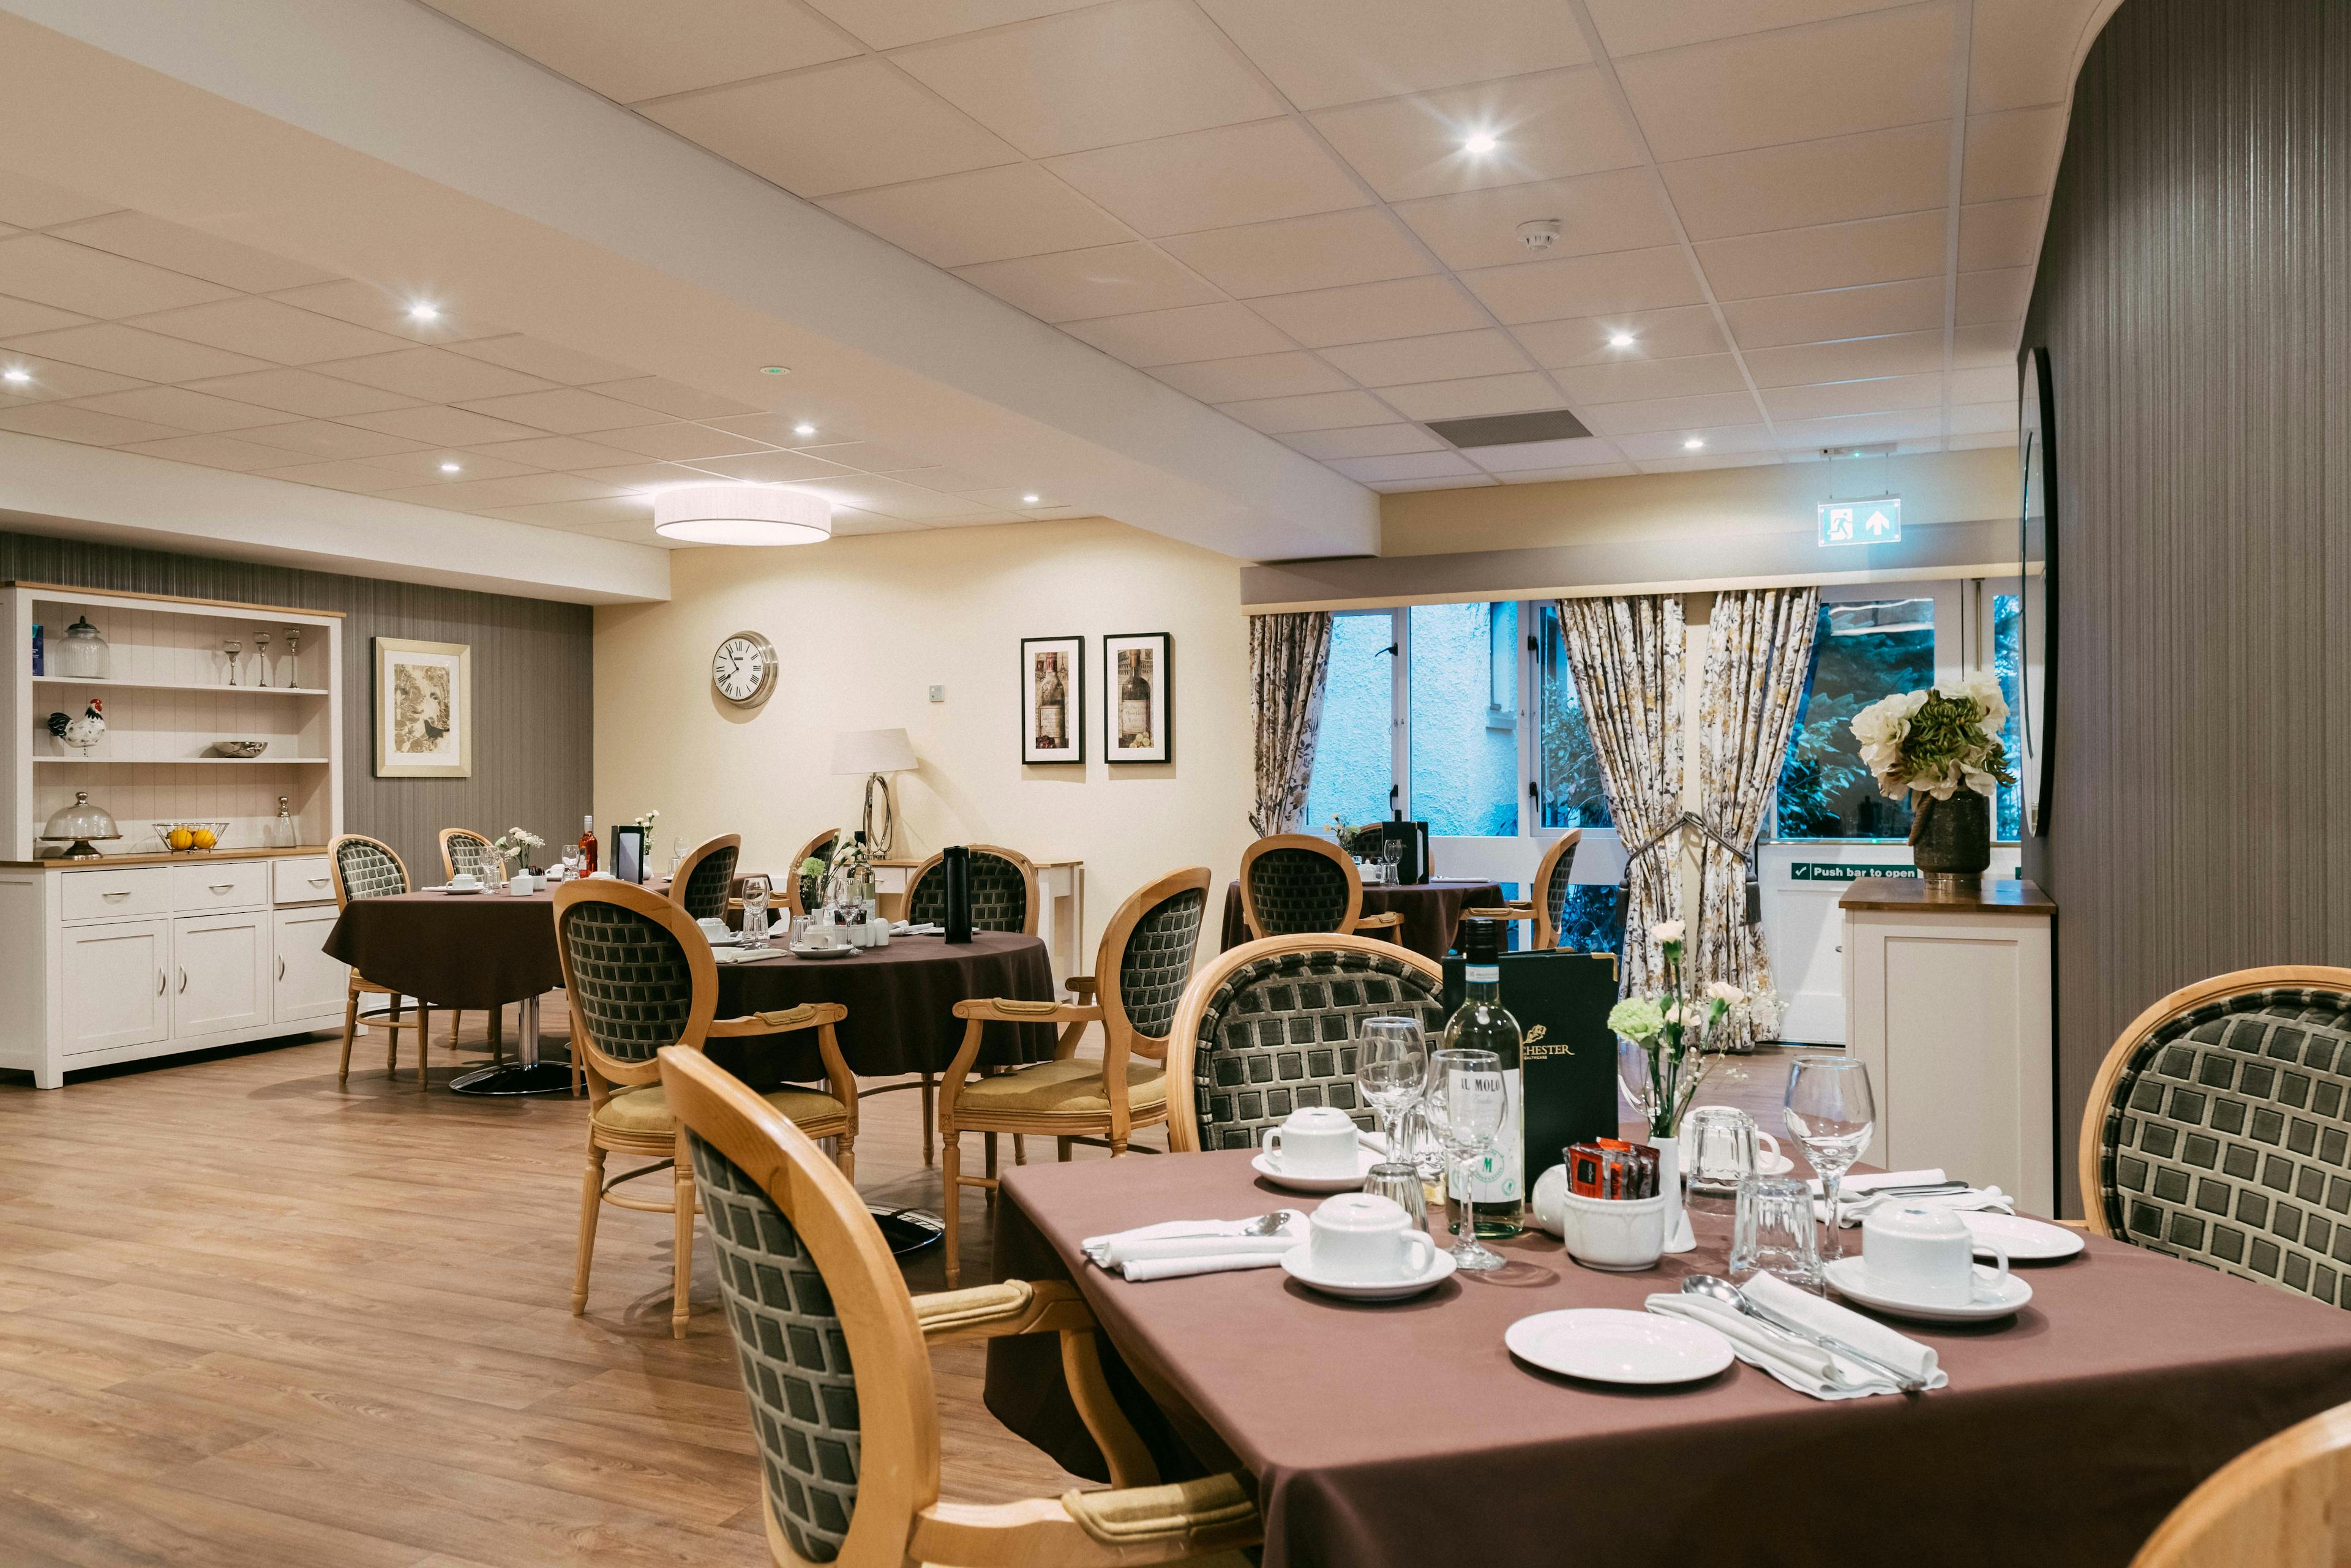 Dining Room at Strachan House Care Home in Edinburgh, Scotland